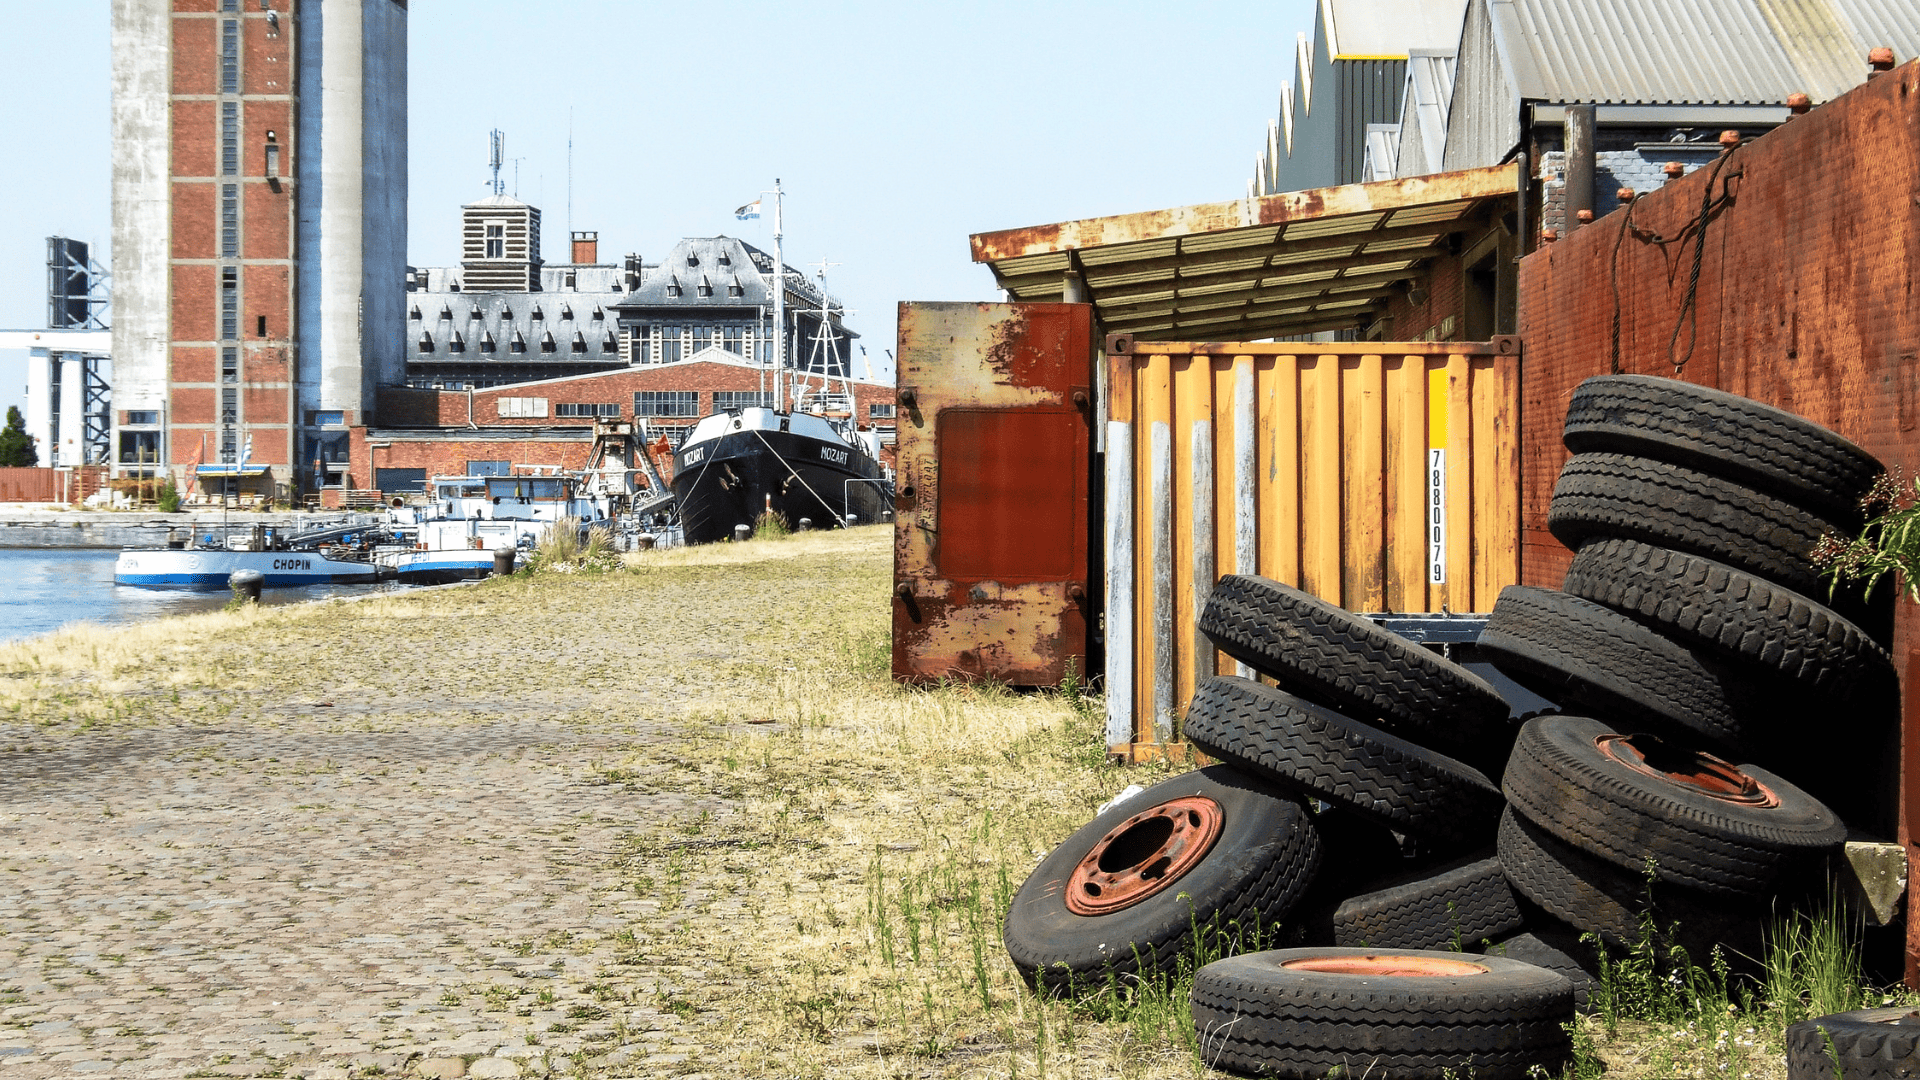 a pile of tires against a rusty fence at an industrial waterway